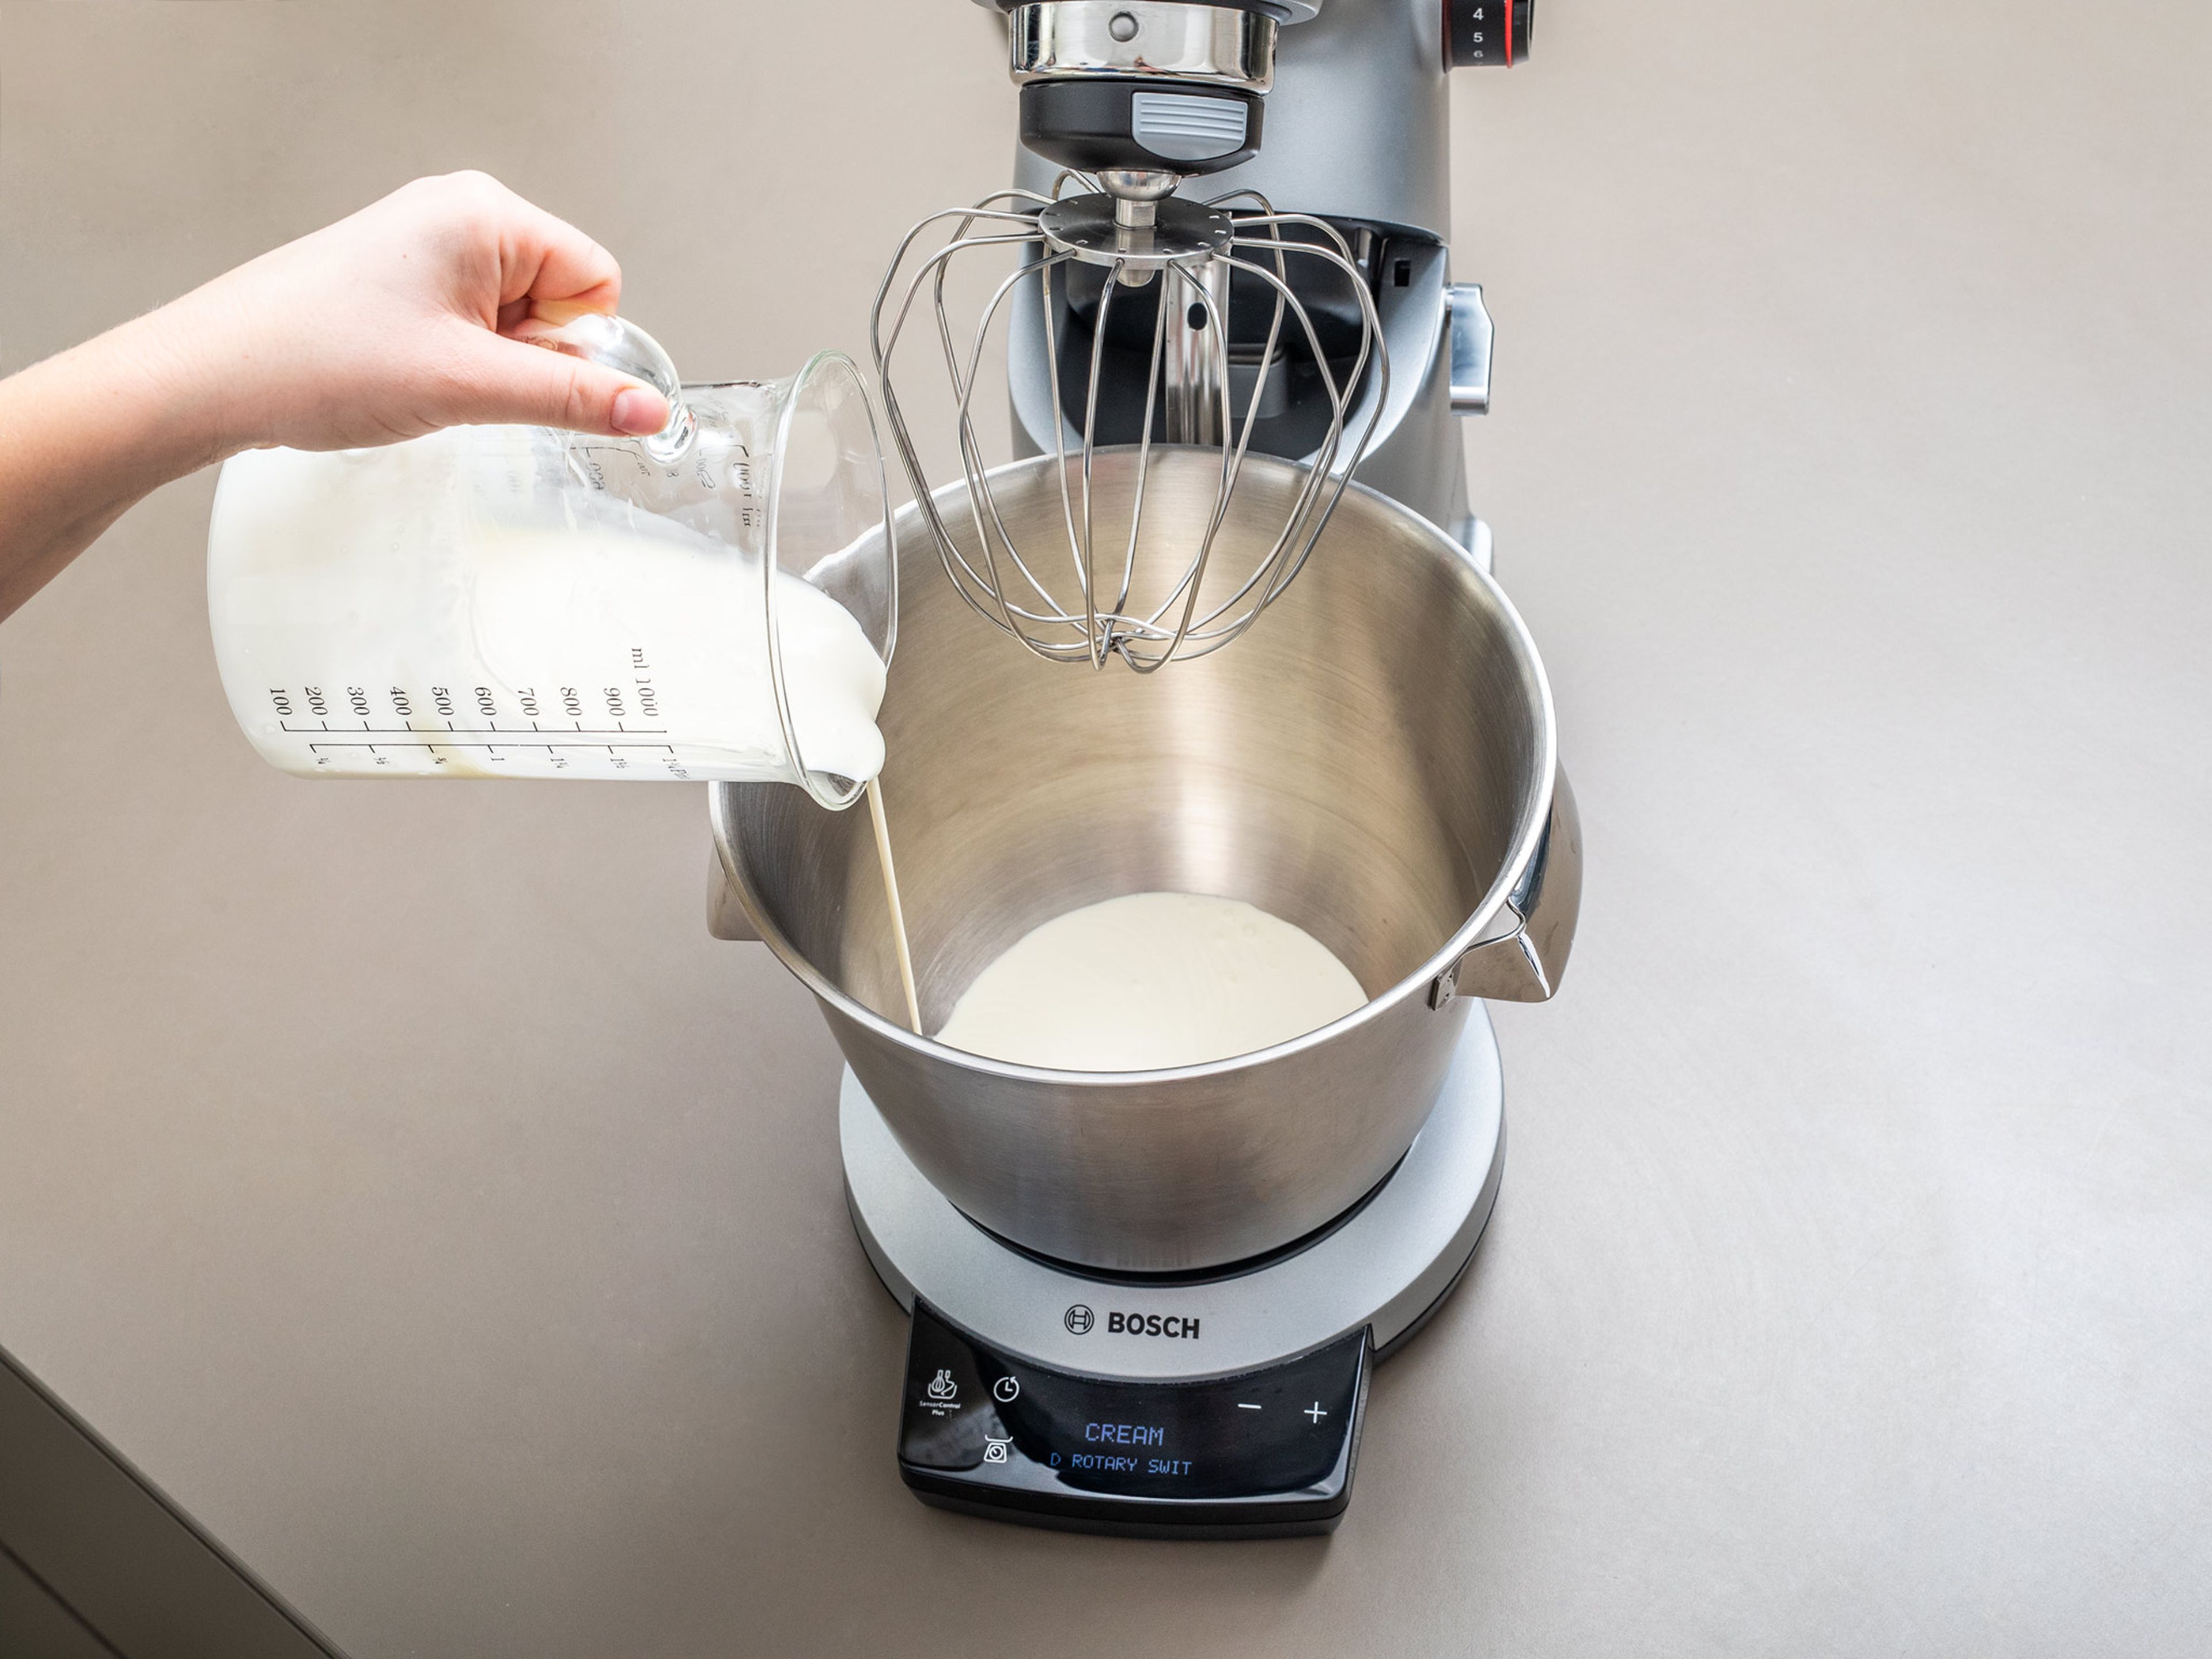 To make the frosting, beat the remaining heavy cream with the remaining sugar, vanilla extract, and whipped cream stabilizer in a kitchen machine with whisk. Once fluffy, approx. 7 min., add tahini and whip just to combine.